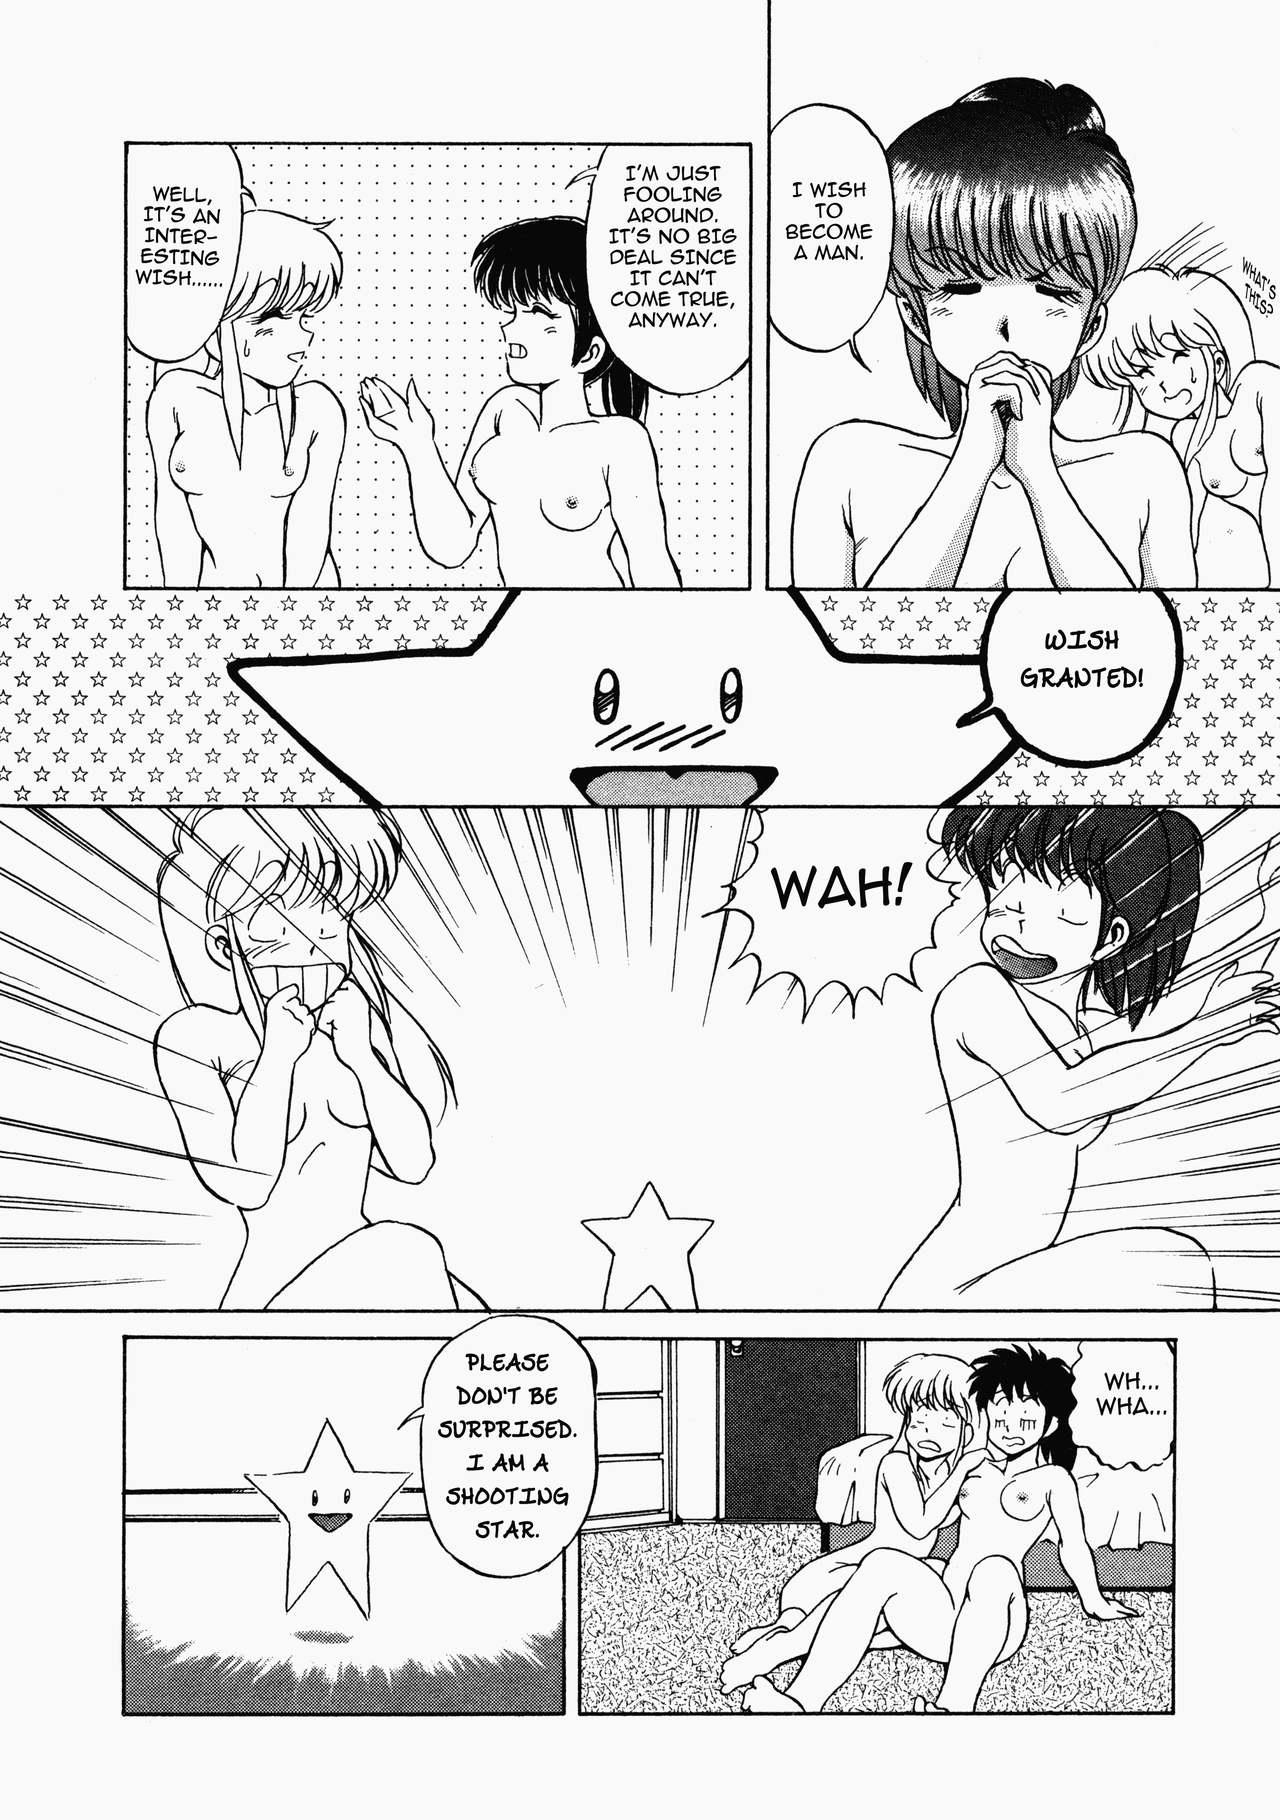 The Happening STAR prologue + Act 1 - 2 Big Ass - Page 10